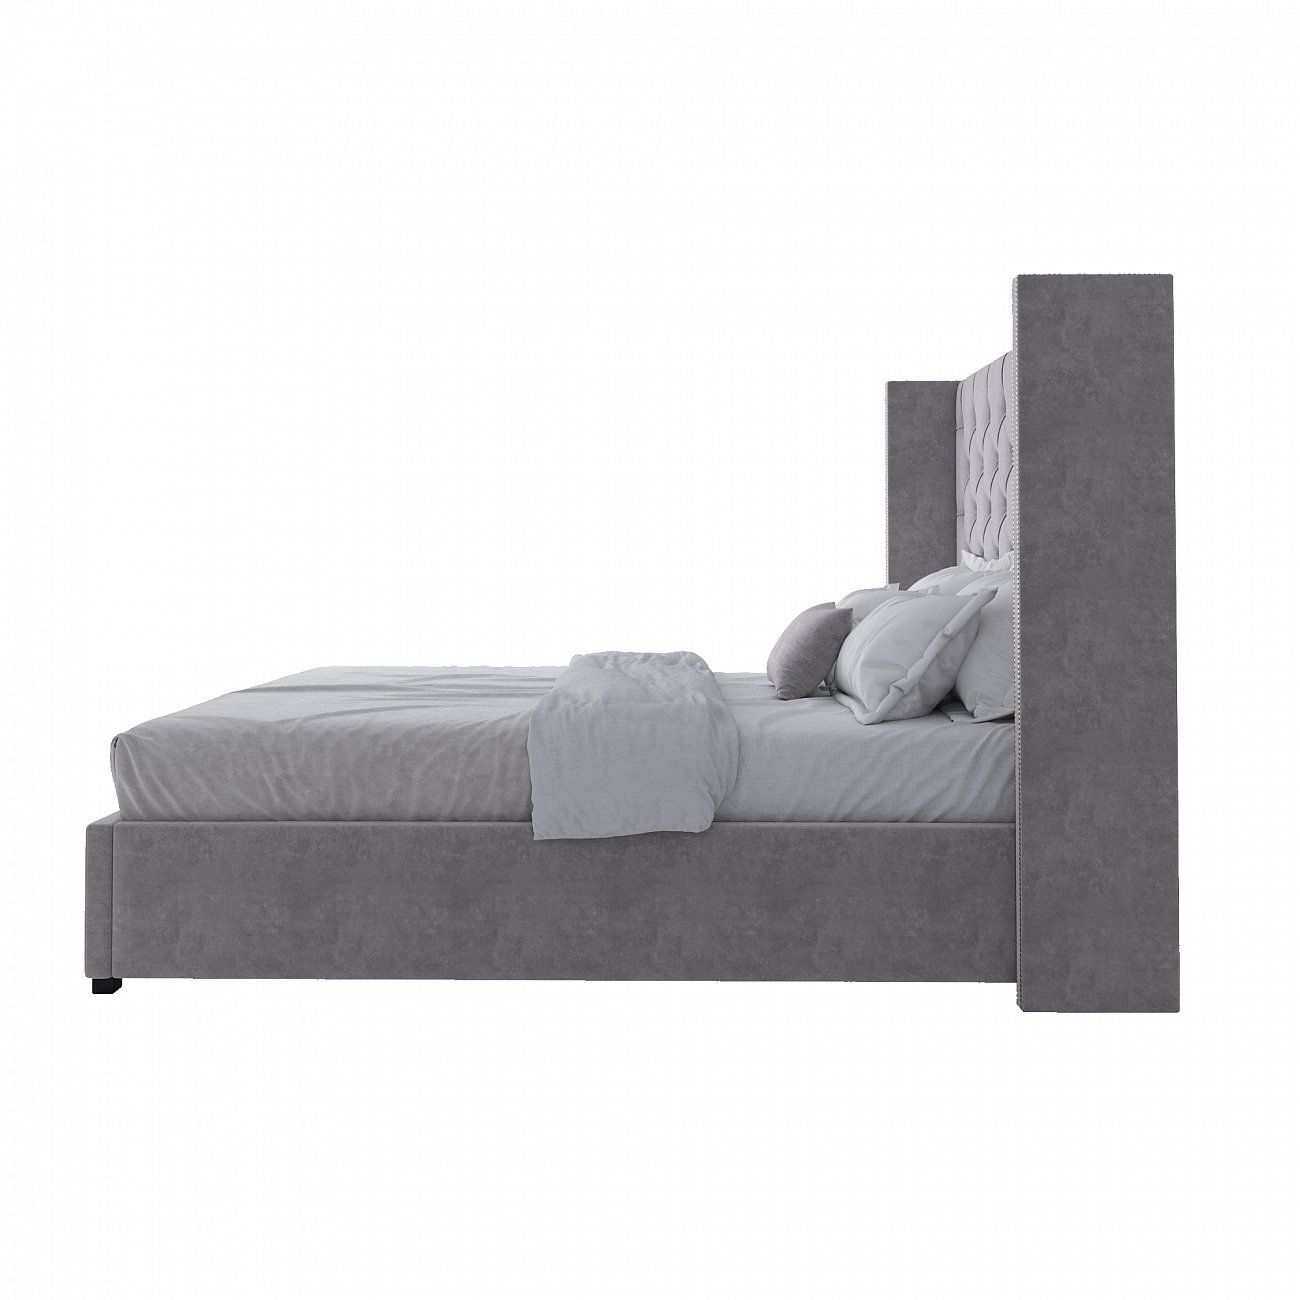 Double bed 160x200 cm with carnations gray-beige Wing